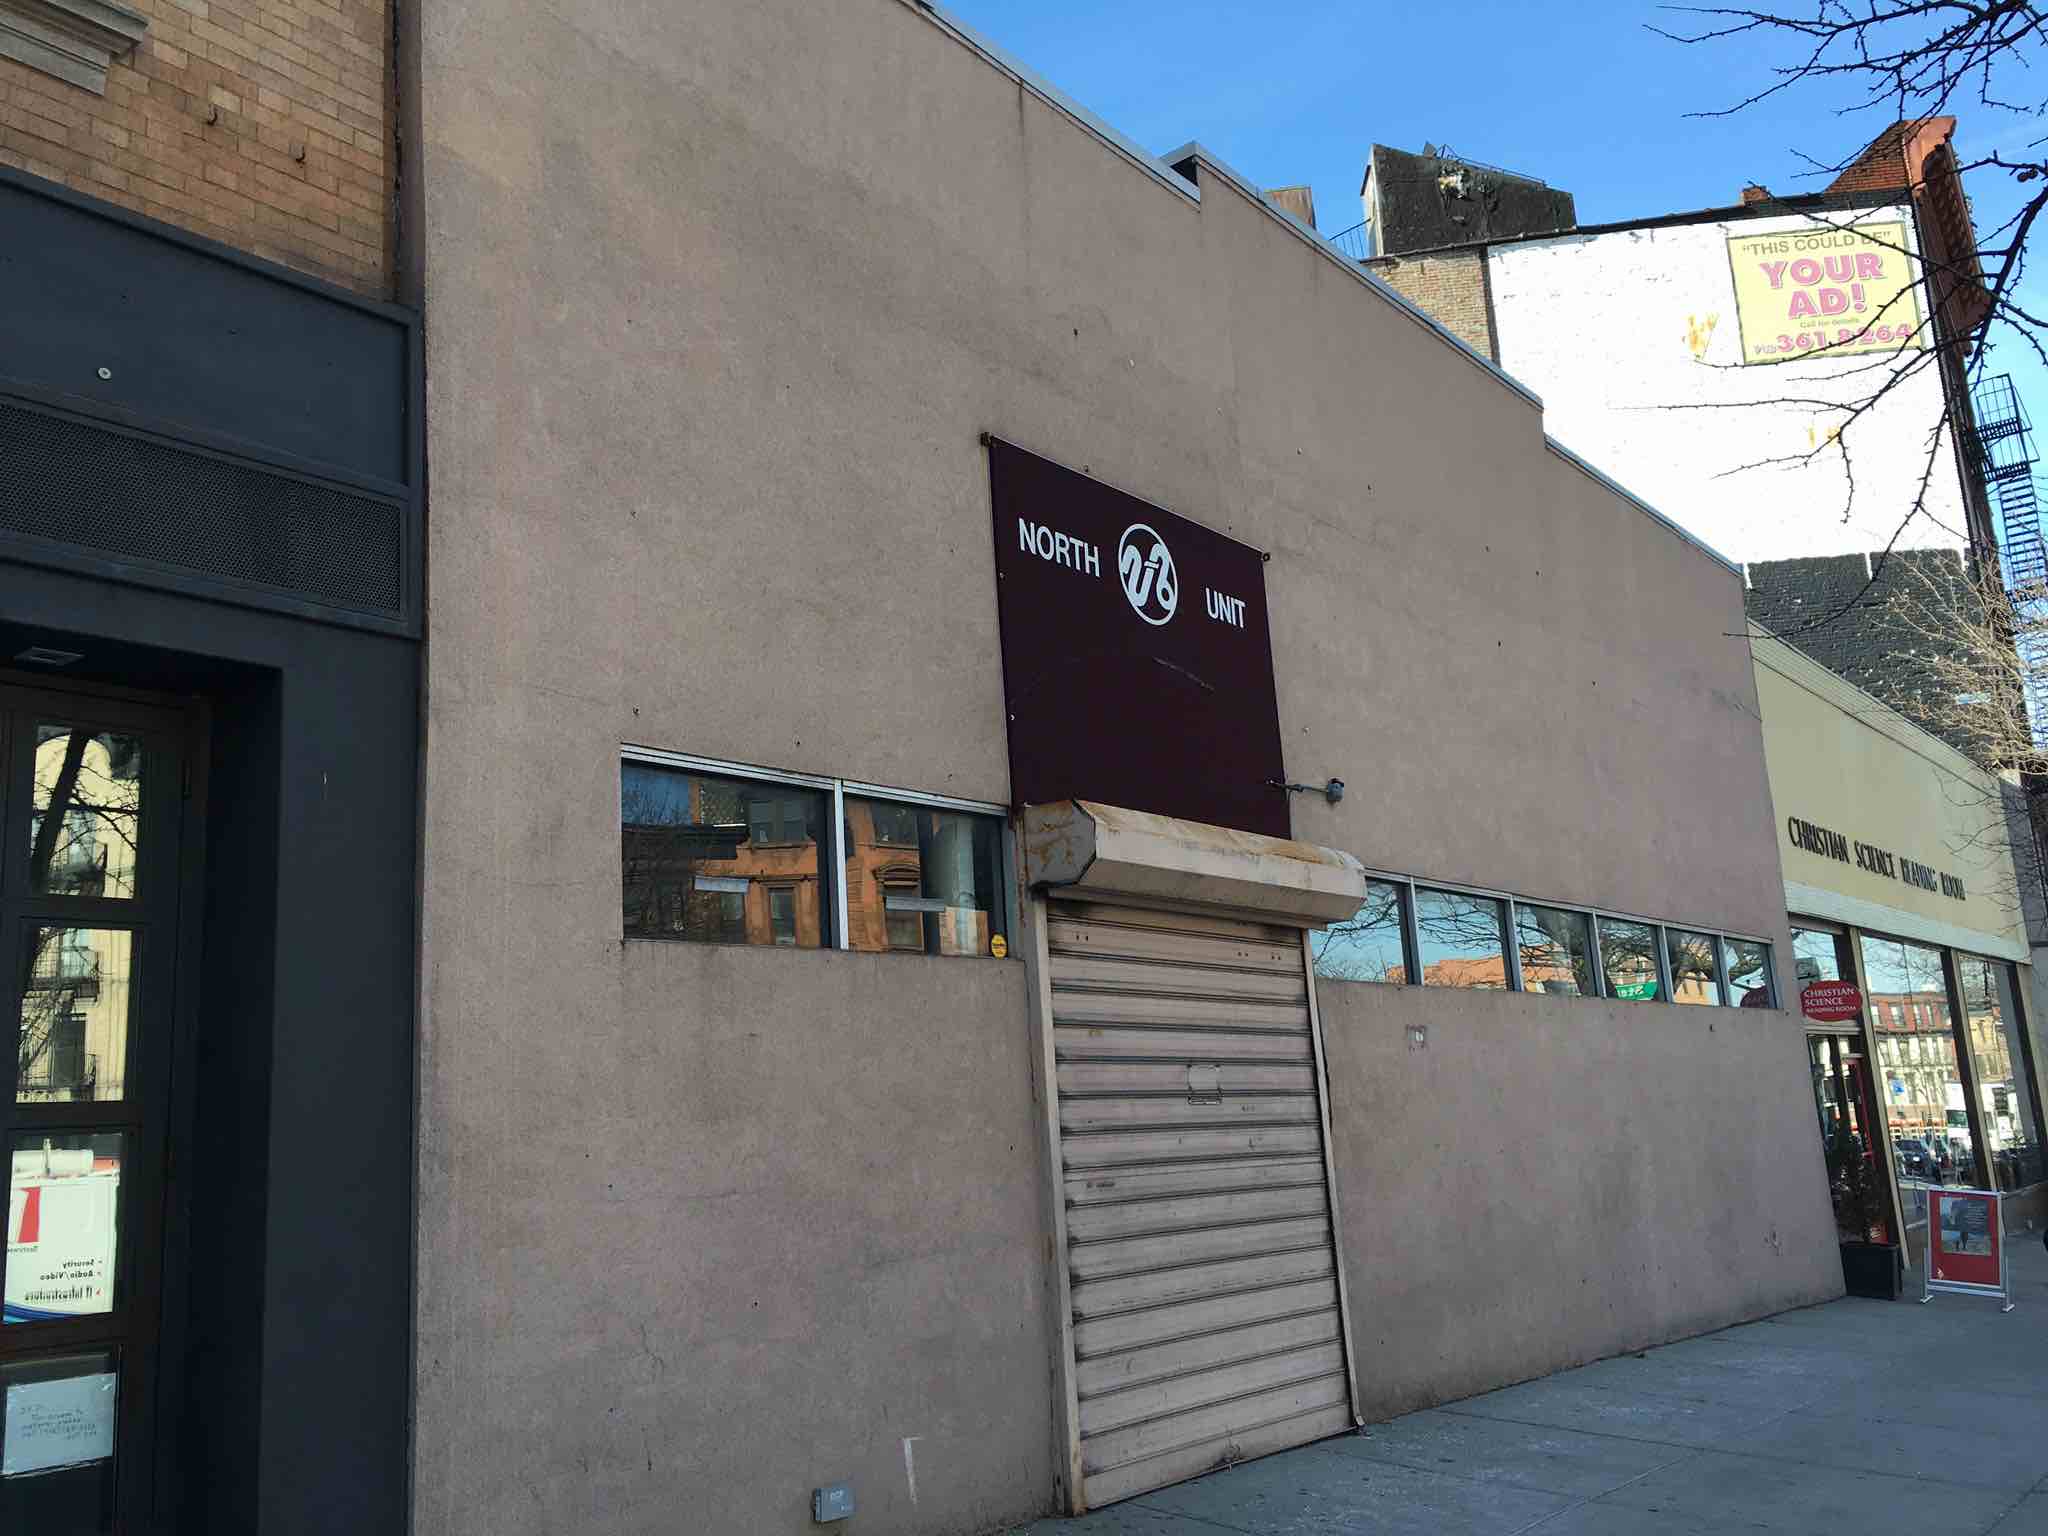 While 5th Avenue Key Food Could Be Lost, Pricey Union Market And Spinning Gym To Open New Locations At 342 Flatbush Avenue